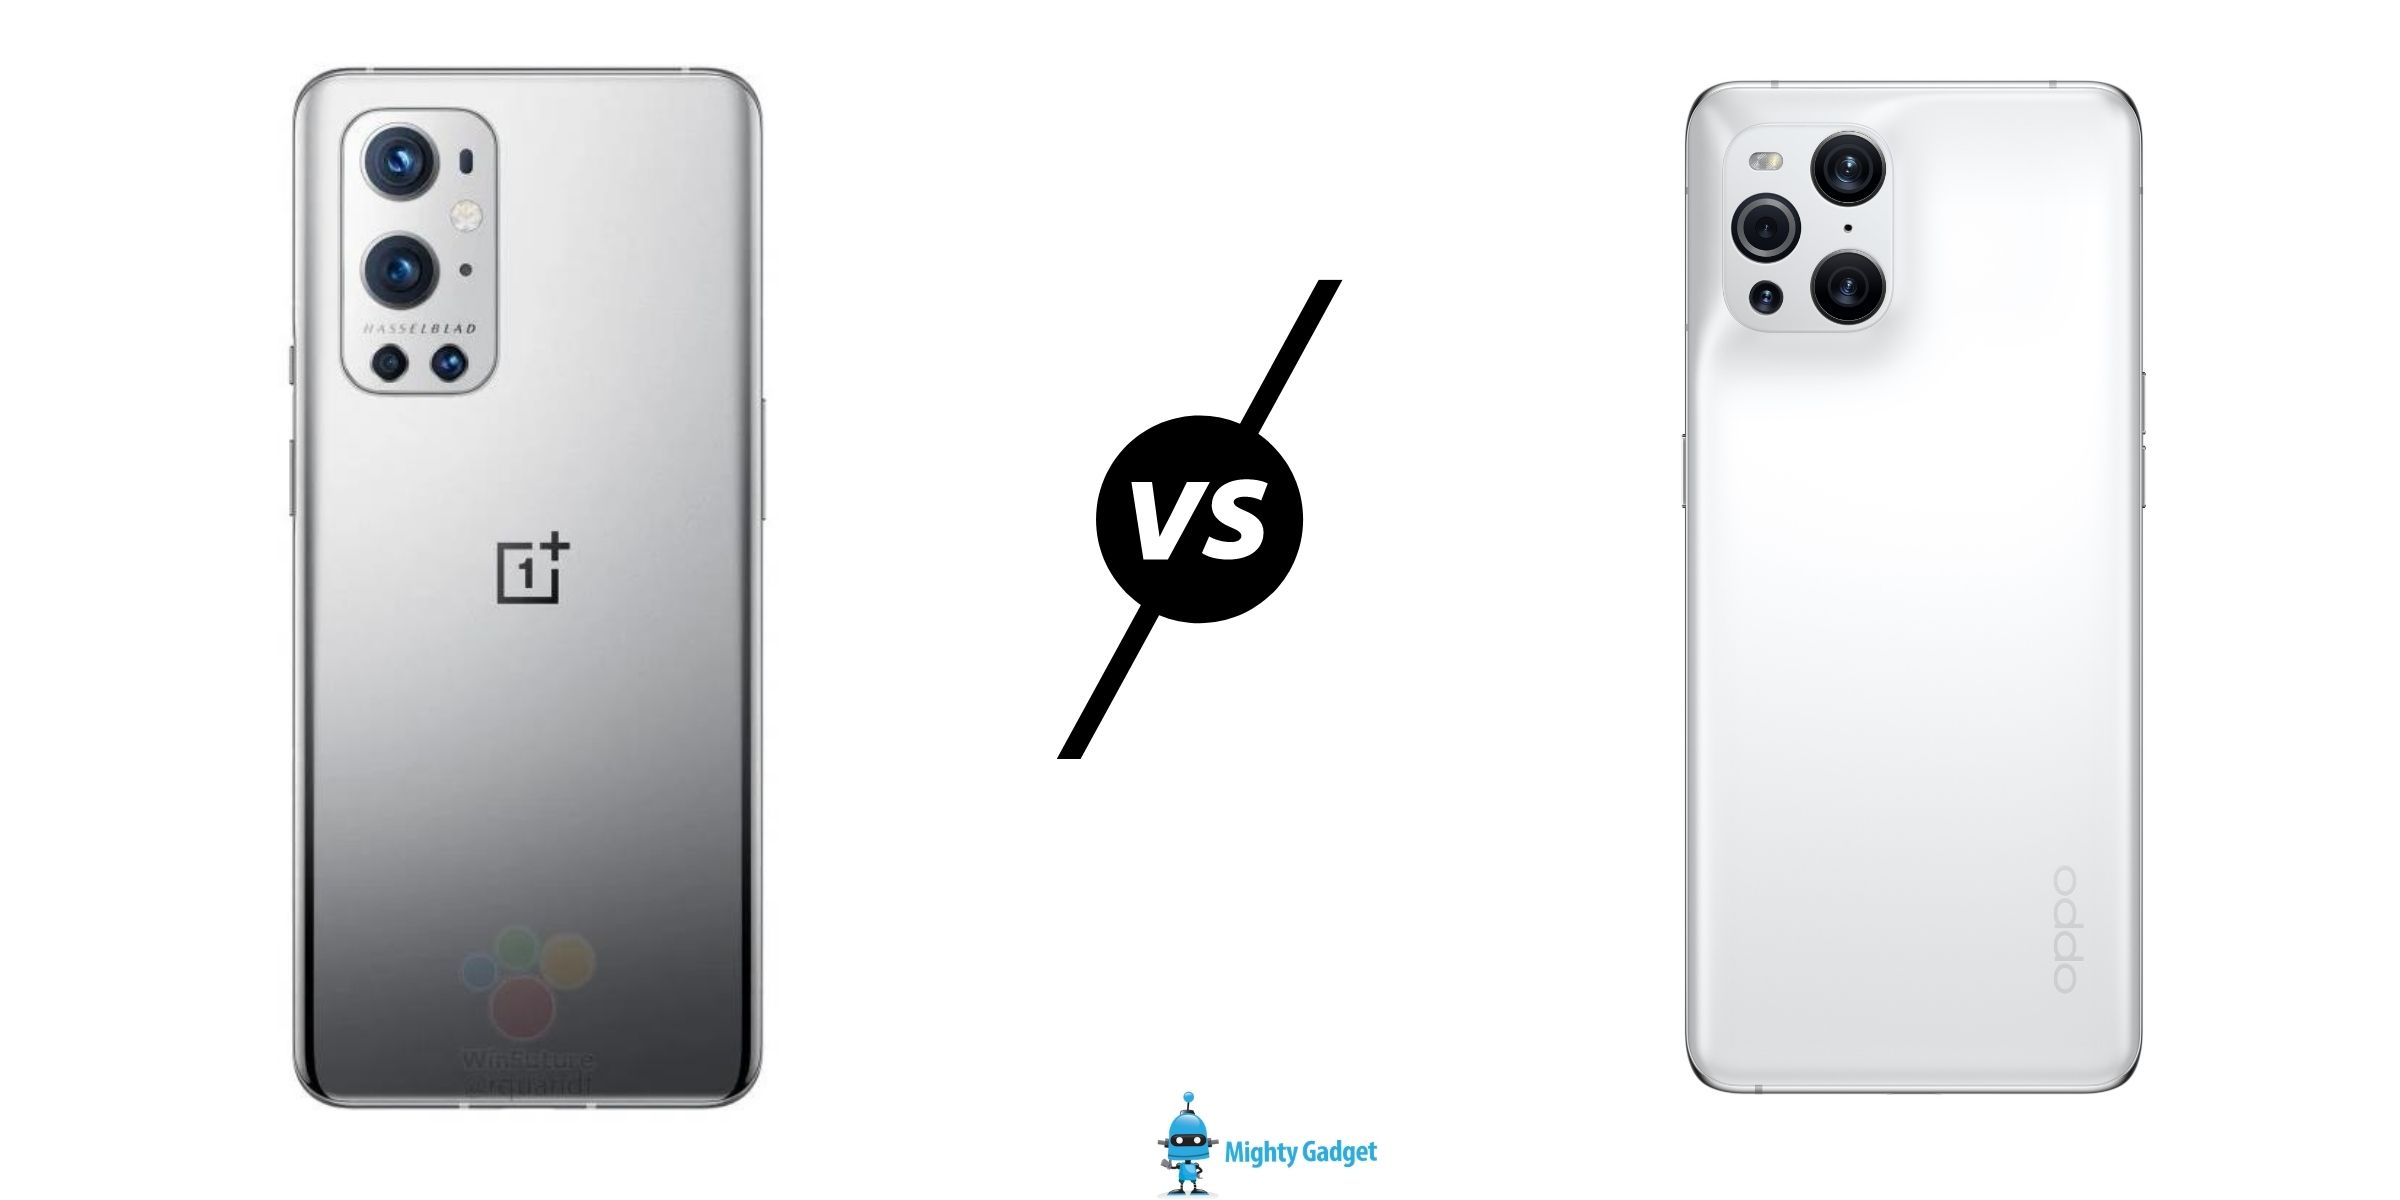 OnePlus 9 Pro vs Oppo Find X3 Pro – How does the Sony IMX 789 compare to IMX 766?